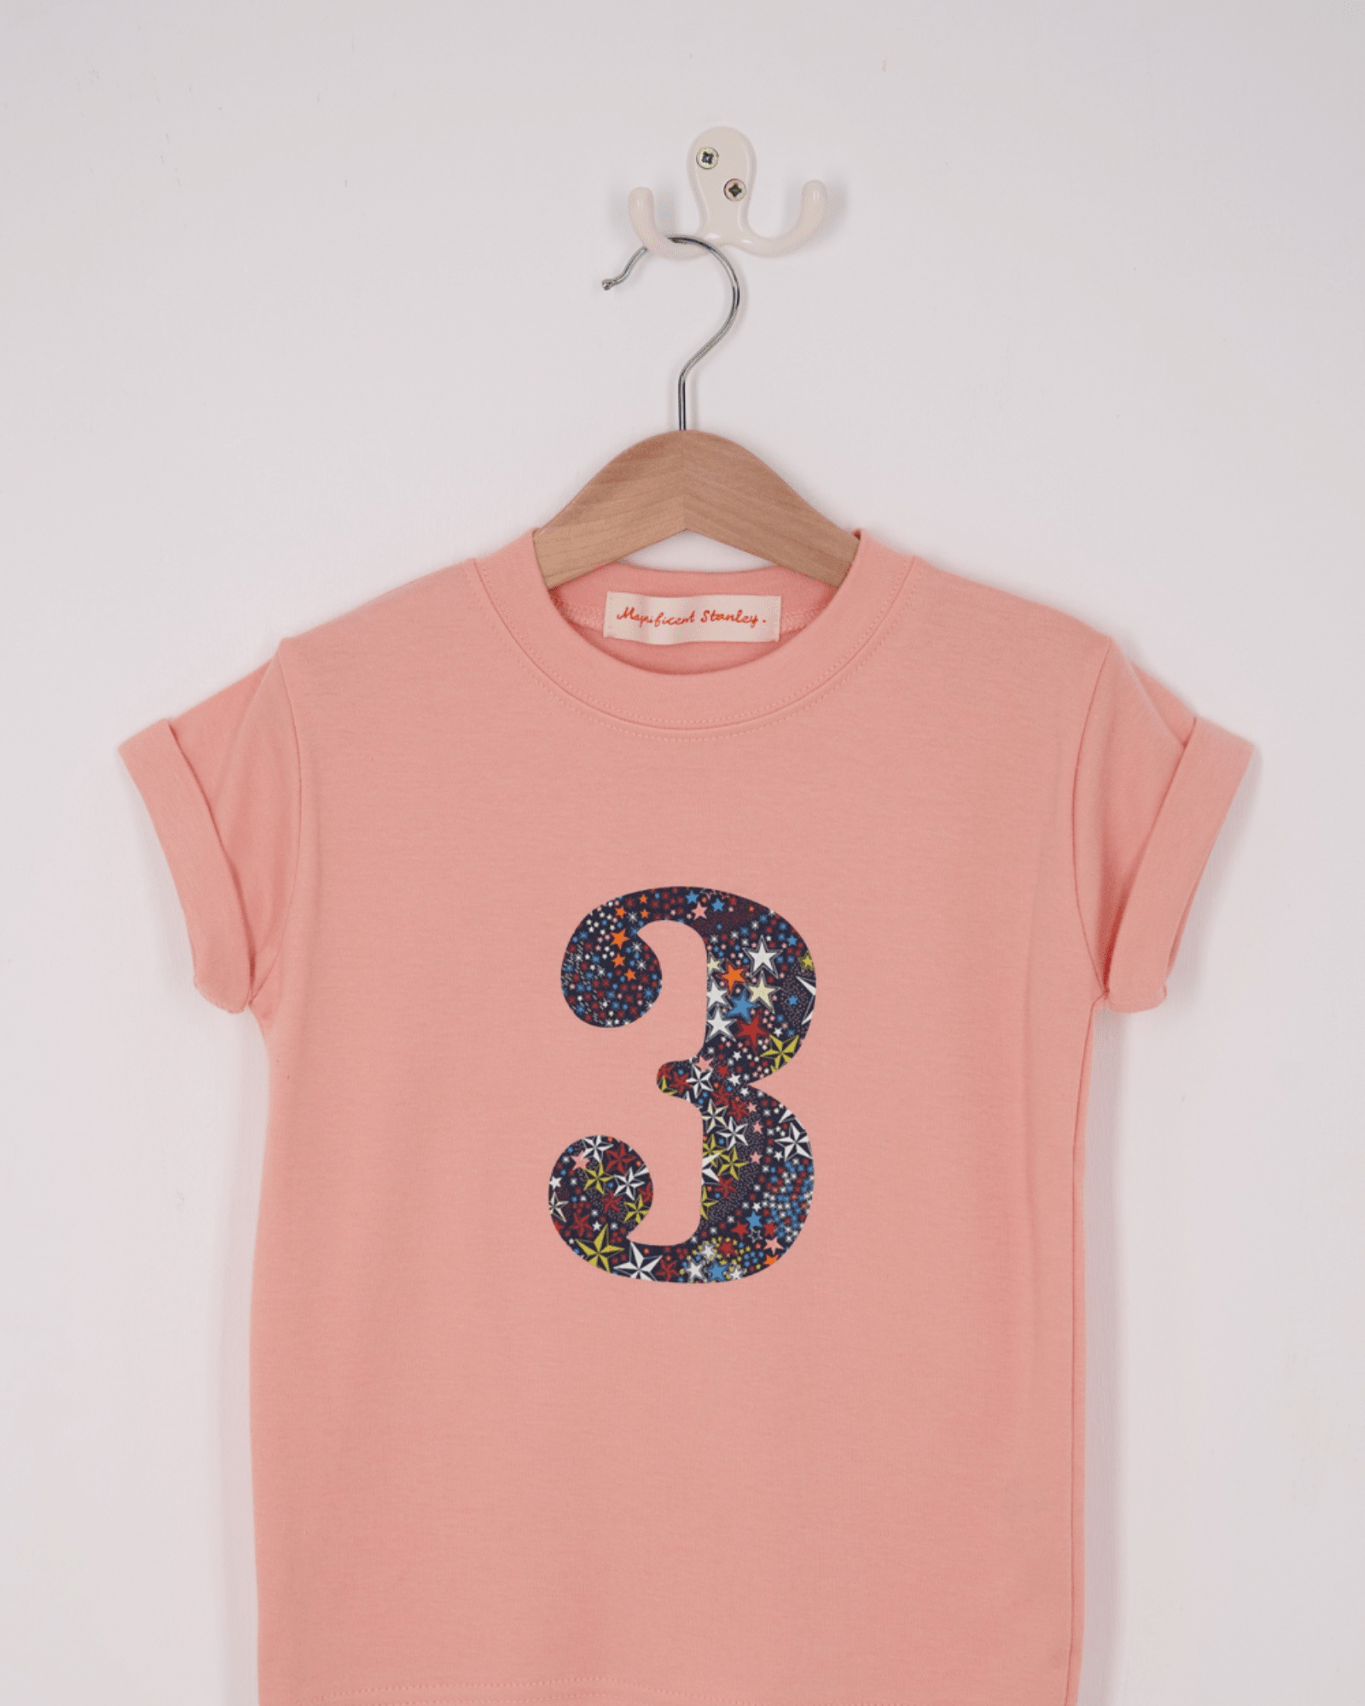 Magnificent Stanley Tee CREATE YOUR OWN Personalised or Age Dusty Pink Liberty Print T-Shirt